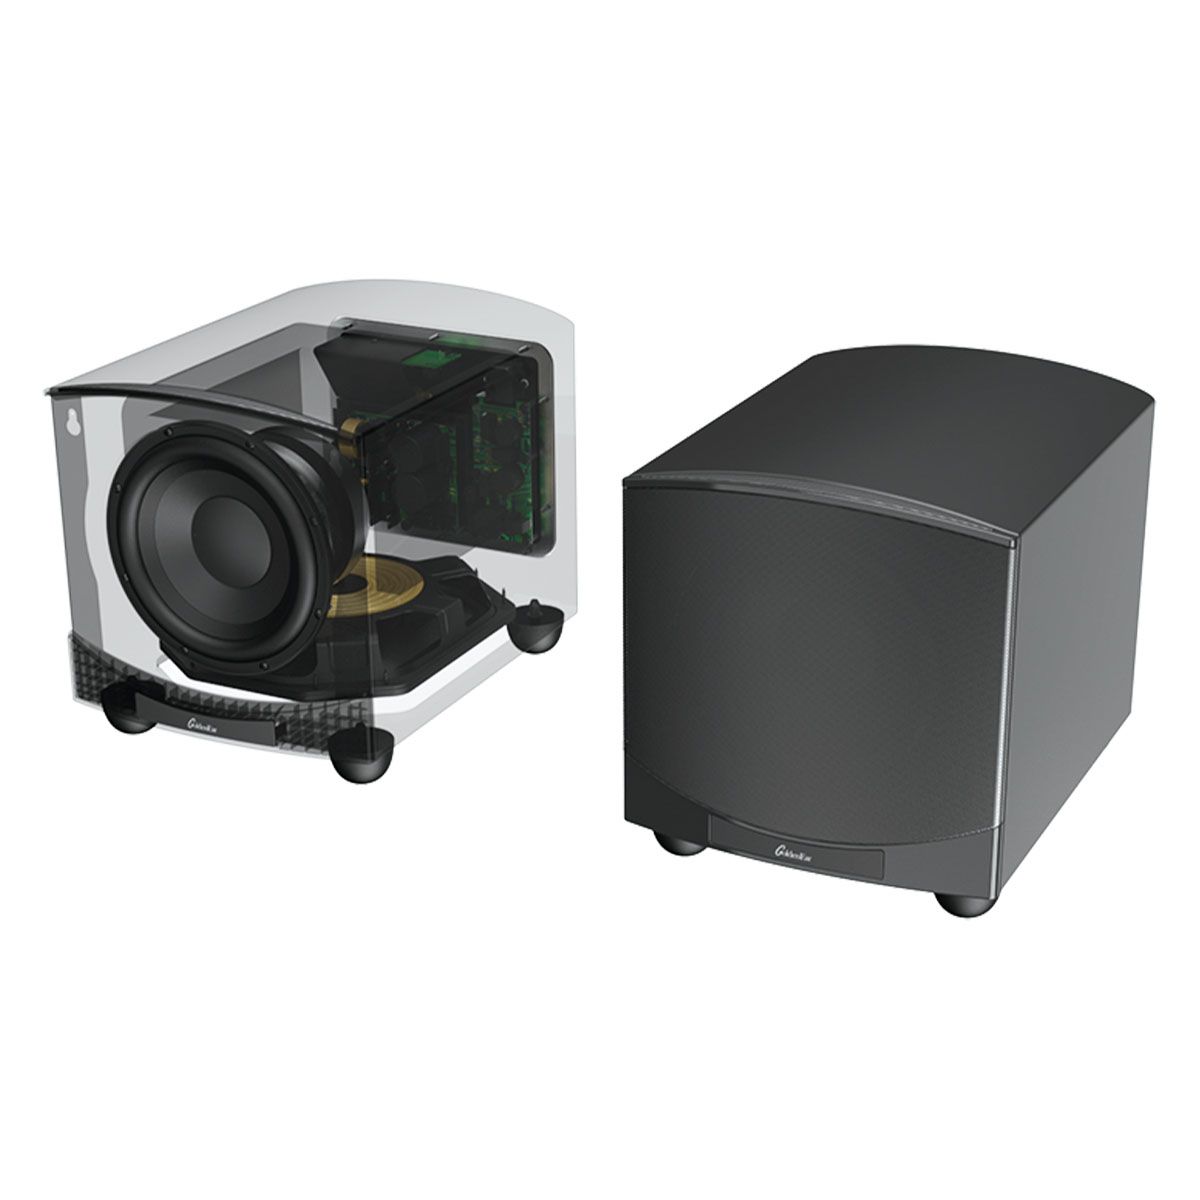 GoldenEar ForceField 30 - 8” Compact Subwoofer - Black - transparent view